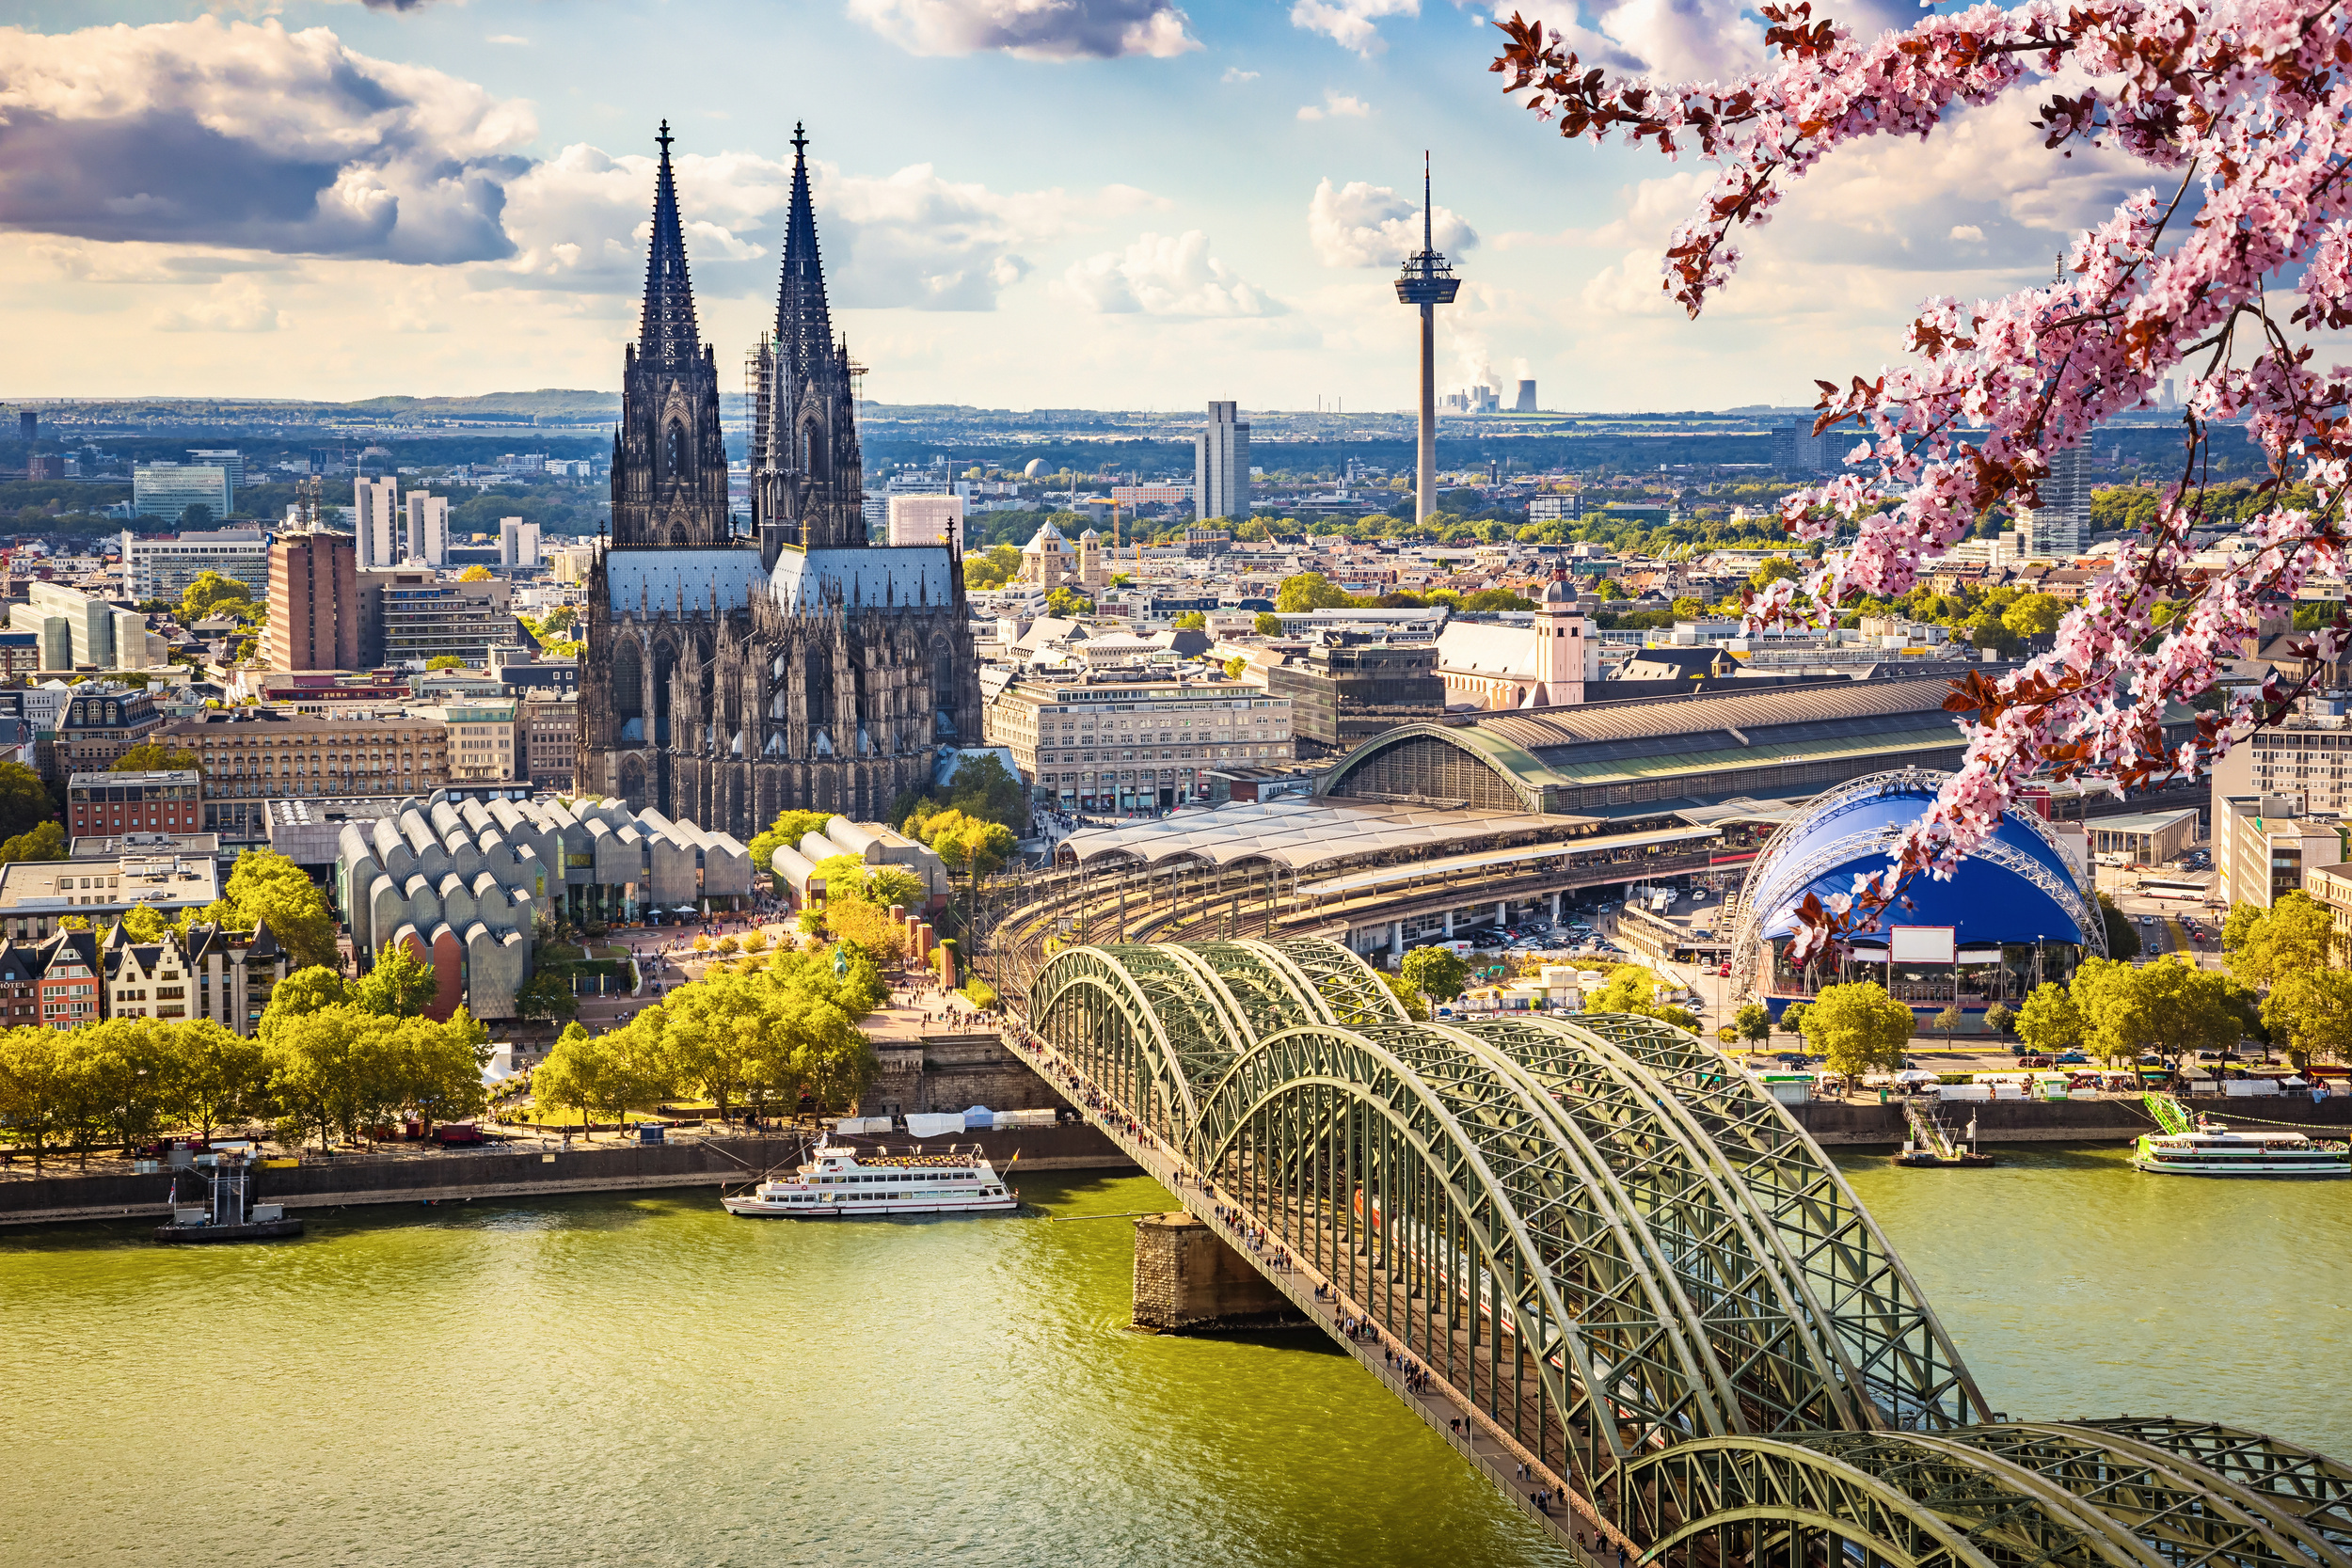 <p>This city in northern Germany is perfect for those looking for fantastic architecture and history. More popular in winter due to fantastic Christmas markets, you’ll surely have a less crowded experience in spring. And don’t forget to climb the cathedral steps for sweeping views of Cologne.</p><p>You may also like: <a href='https://www.yardbarker.com/lifestyle/articles/the_15_beaches_you_need_to_visit_in_southern_california_031024/s1__38820297'>The 15 beaches you need to visit in Southern California</a></p>